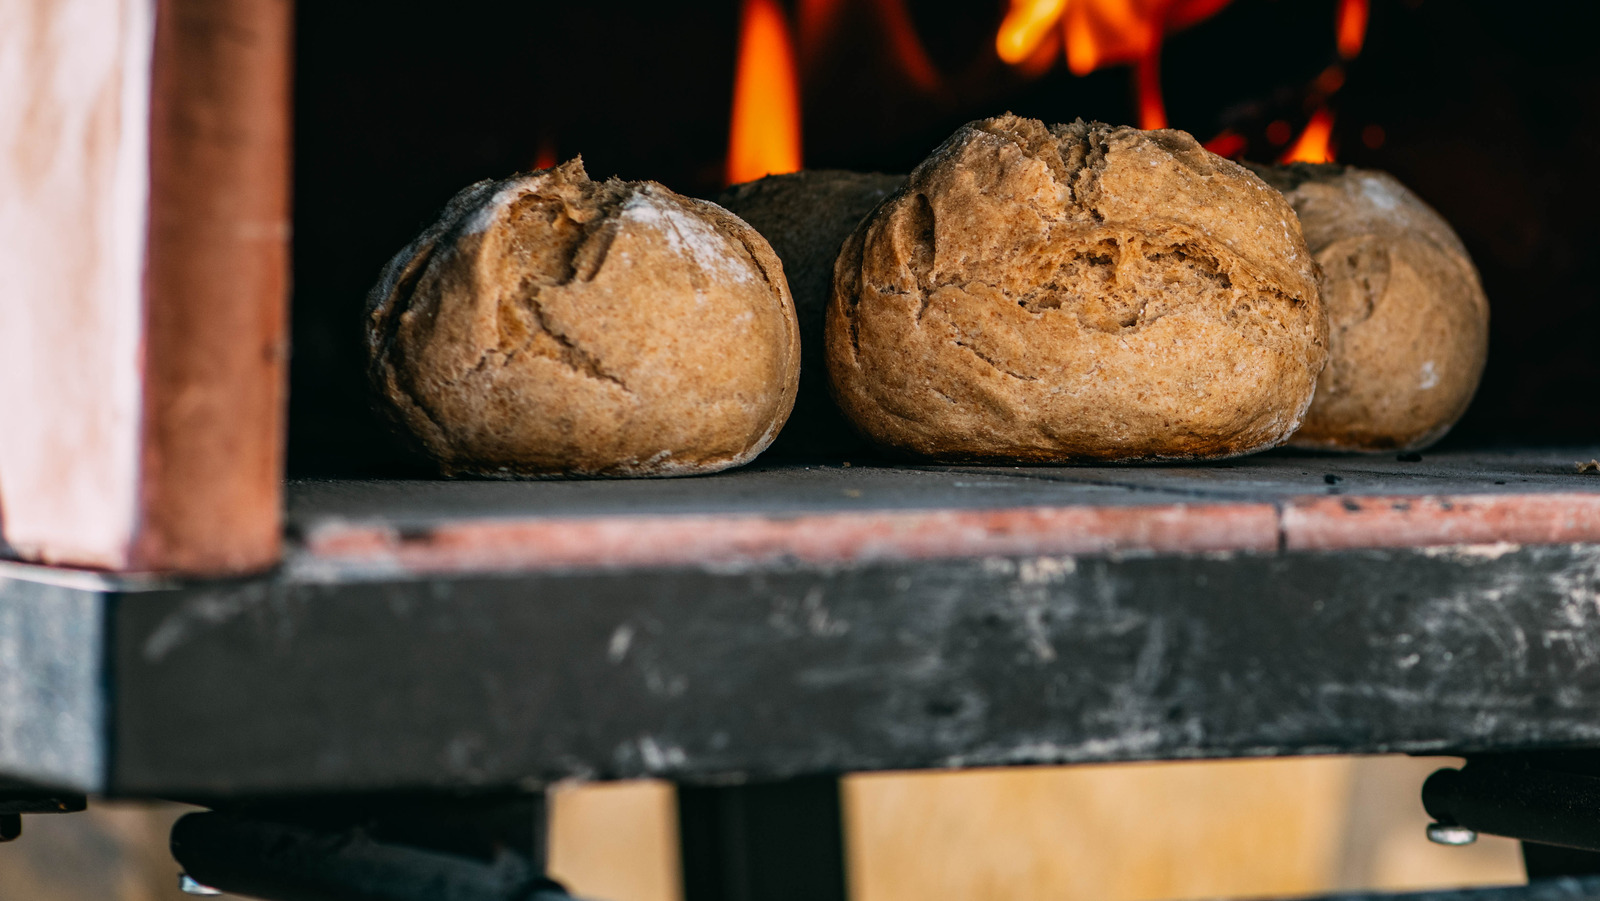 When You Turn Off A Wood-Fired Pizza Oven, Bake A Loaf Of Bread